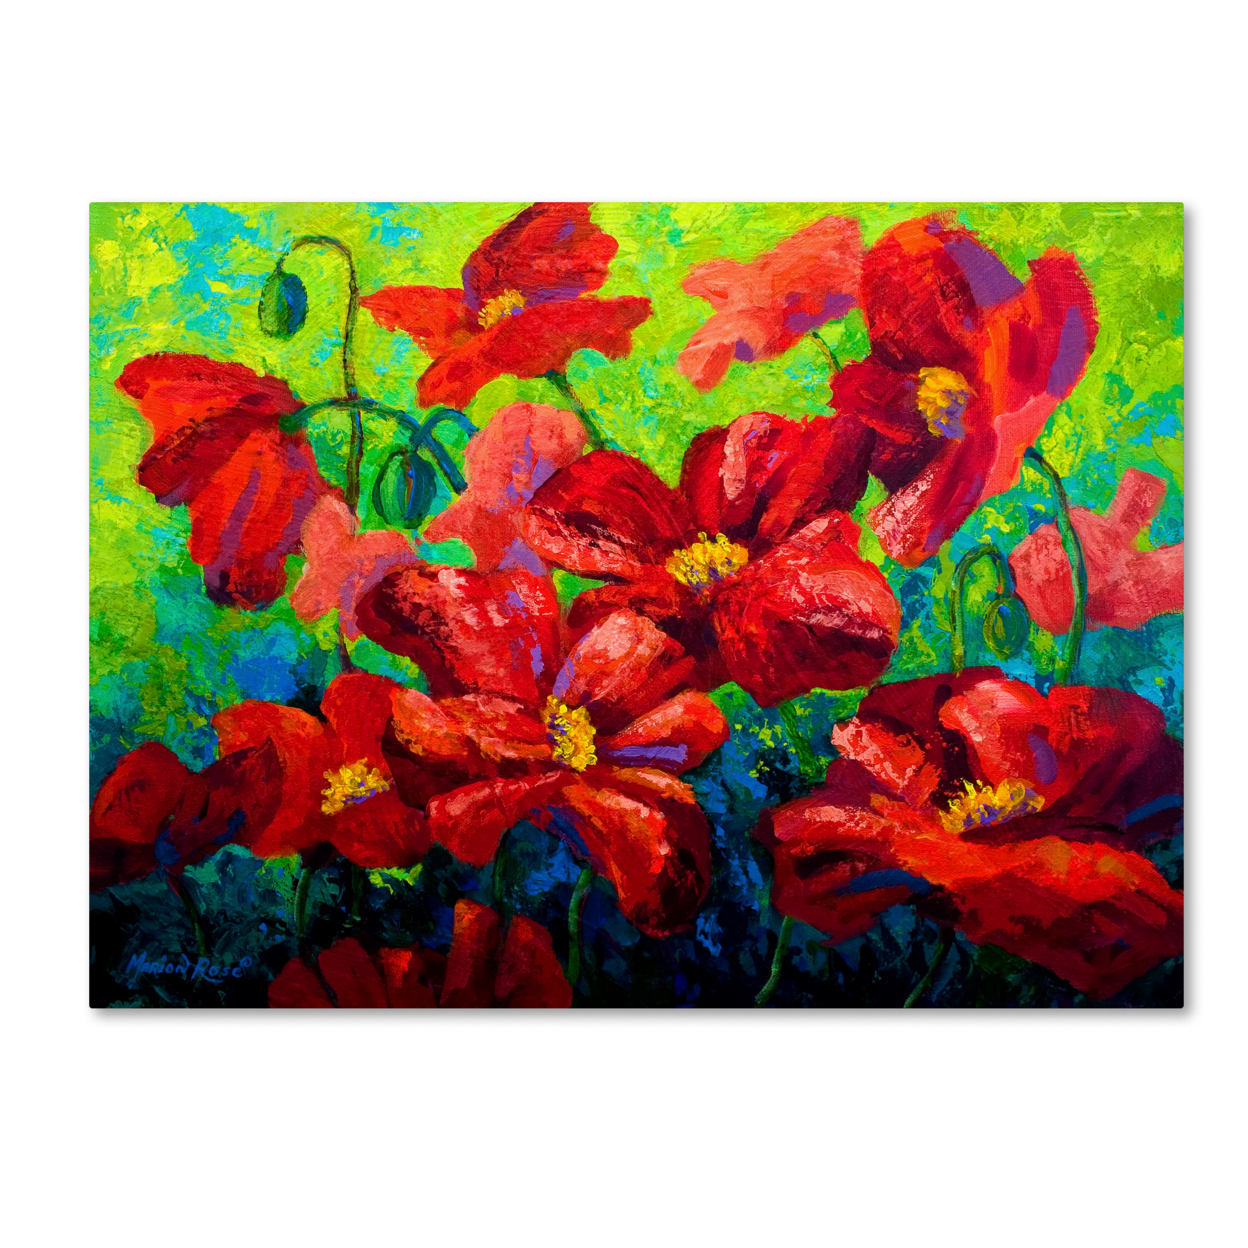 Marion Rose 'Field Of Poppies A' Ready To Hang Canvas Art 18 X 24 Inches Made In USA